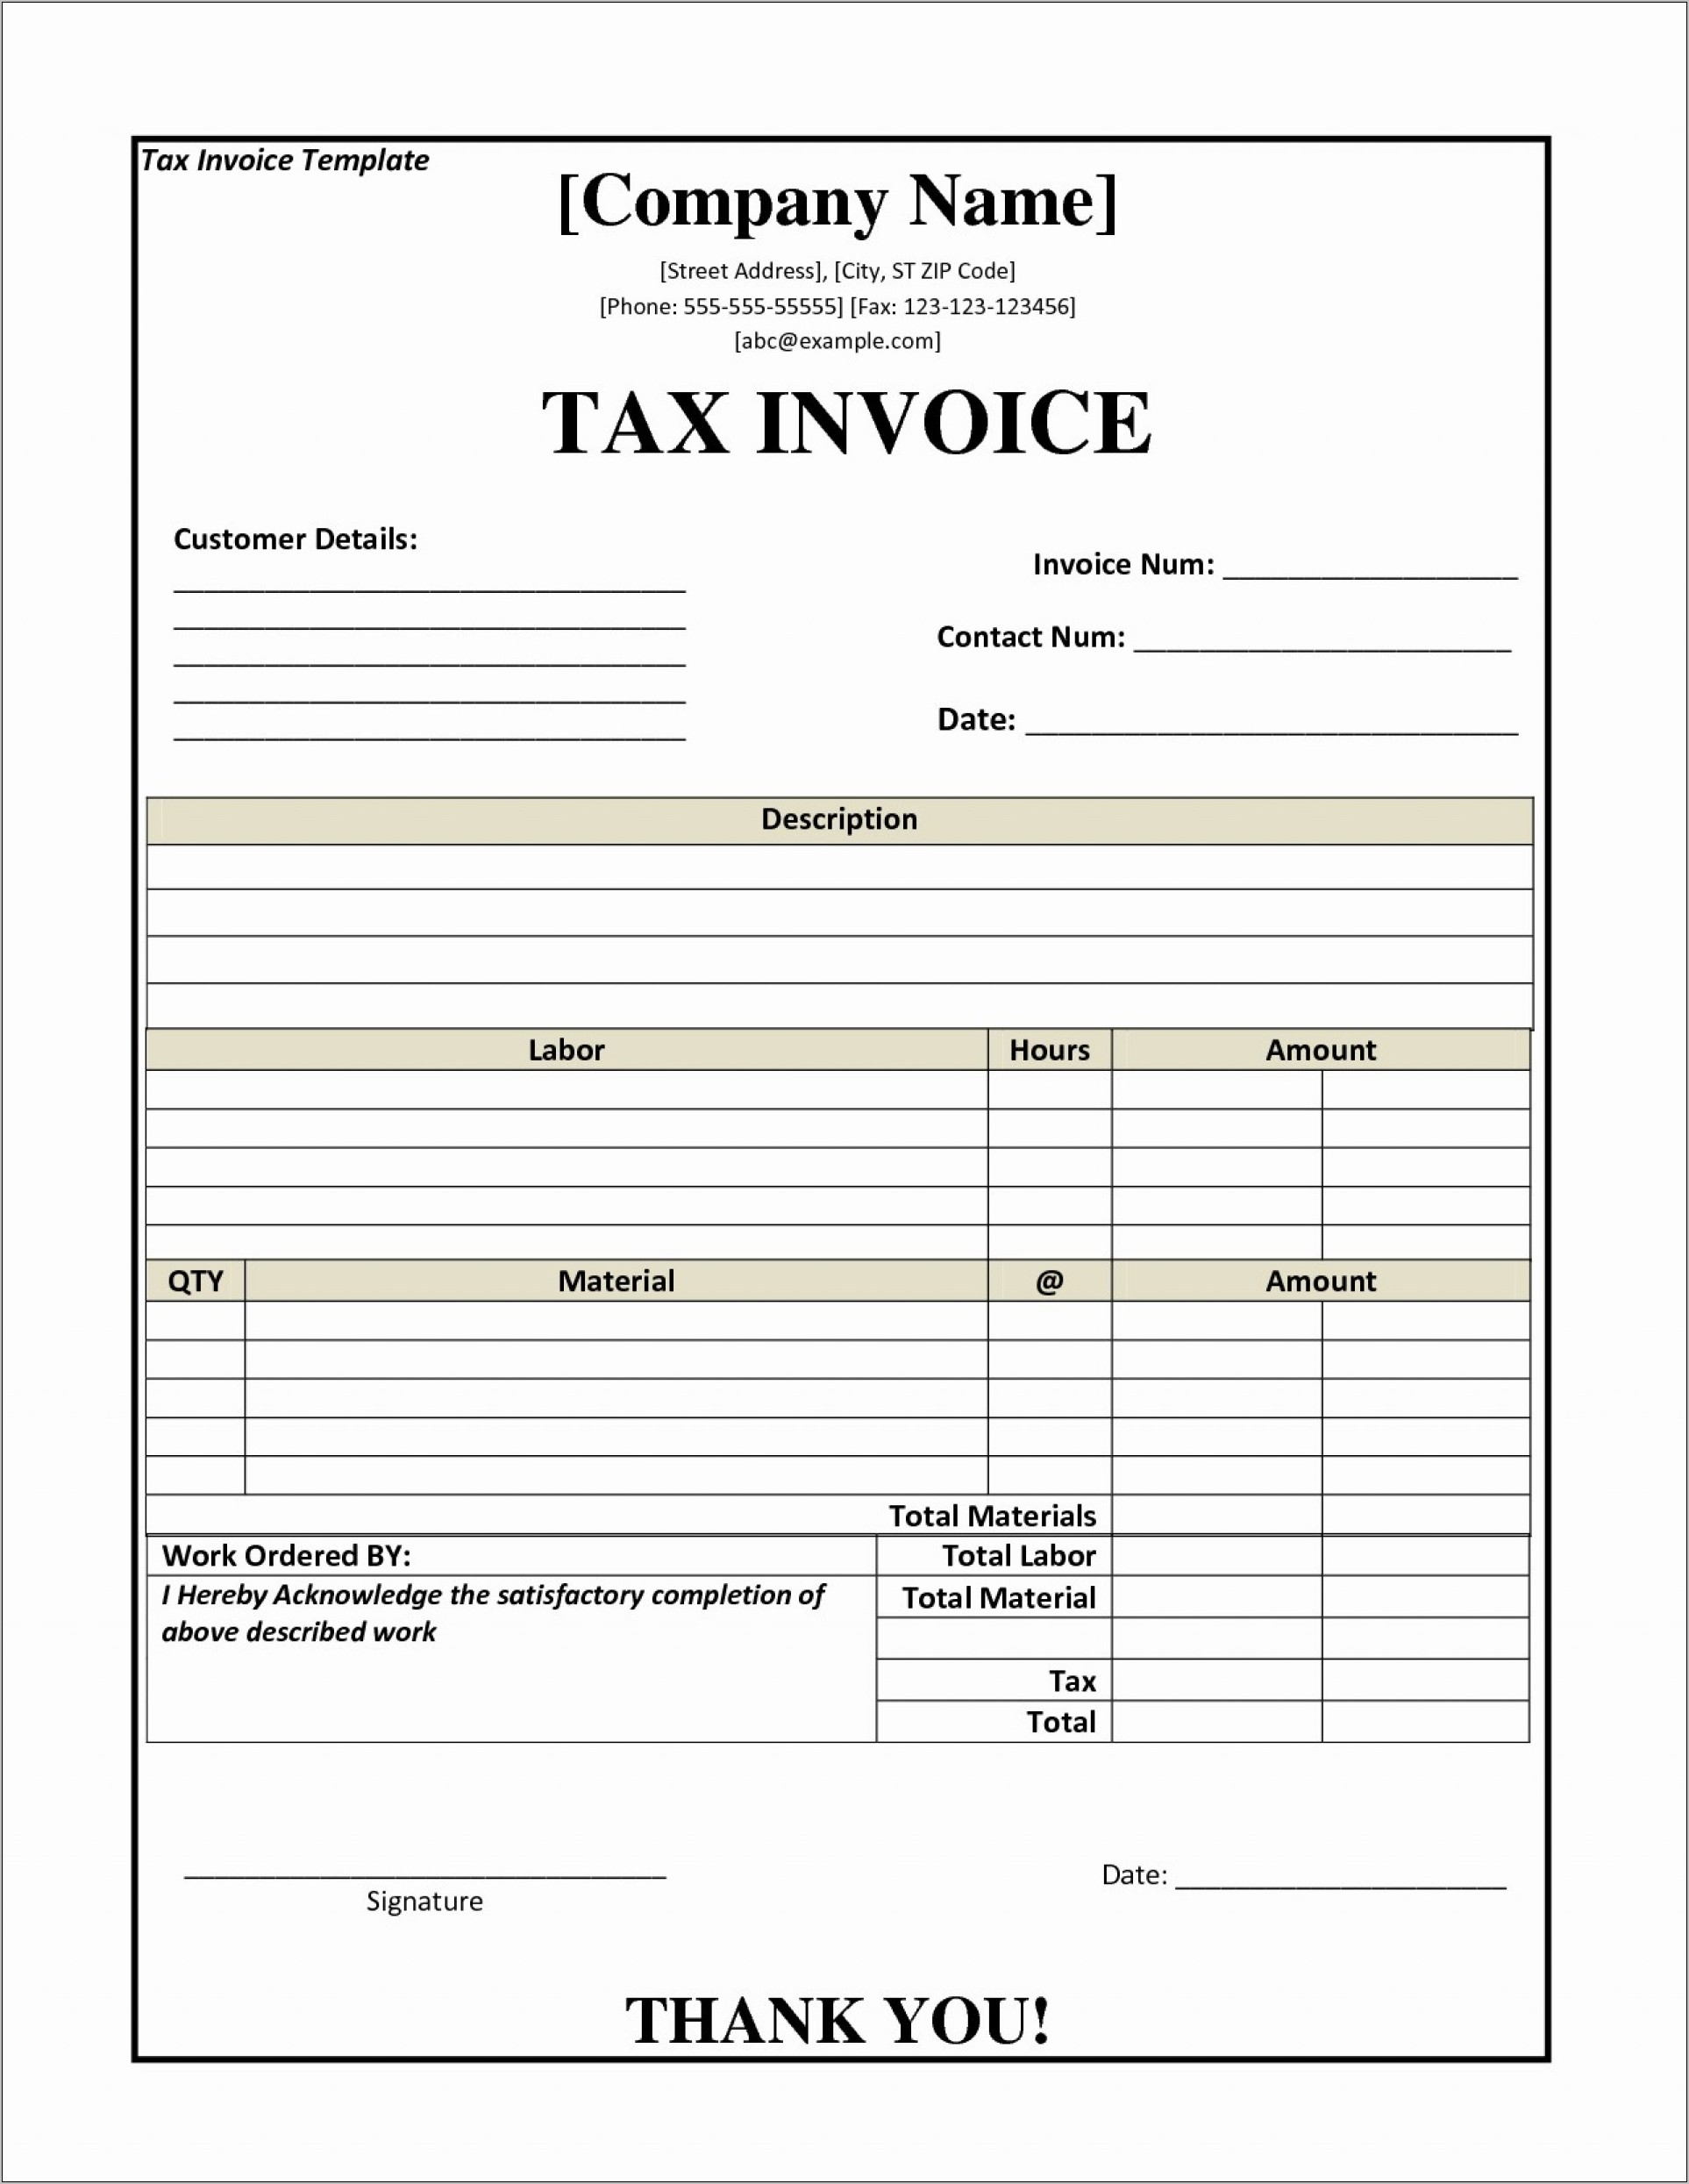 Tax Invoice Format In Word Under Gst